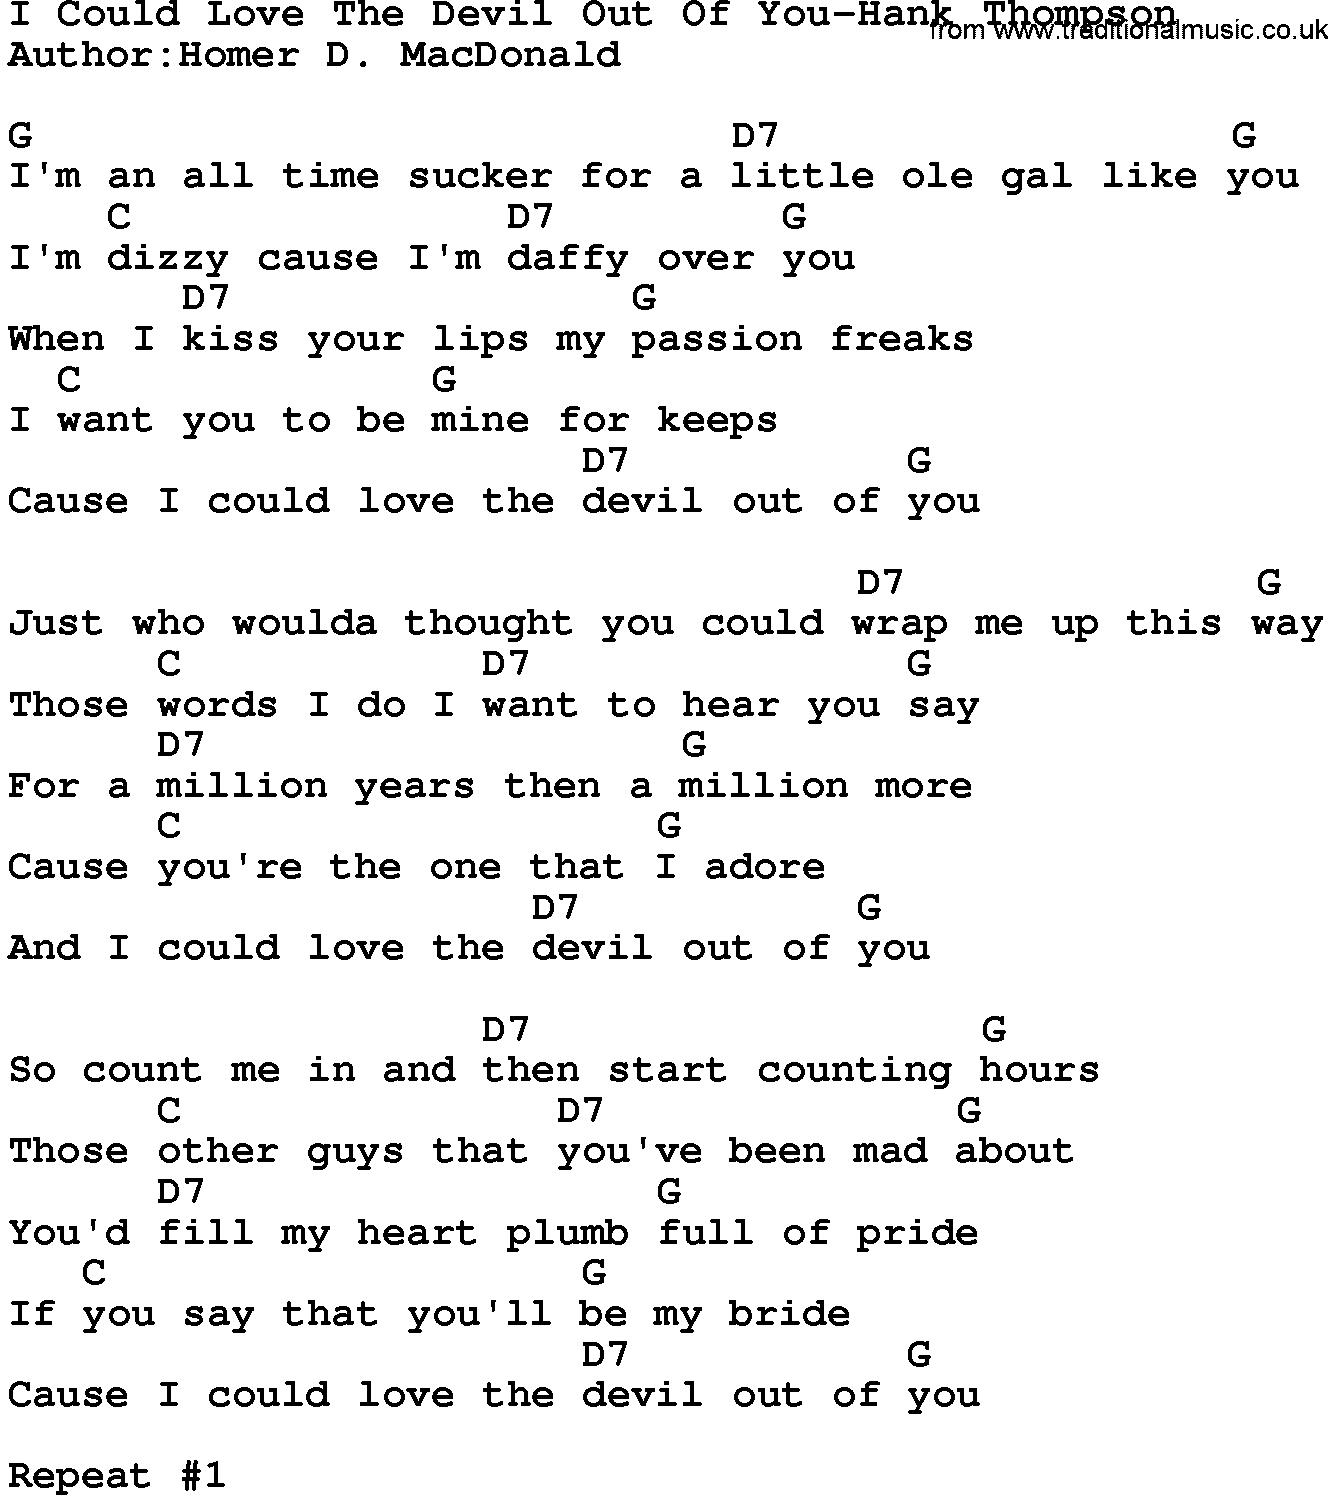 Country music song: I Could Love The Devil Out Of You-Hank Thompson lyrics and chords